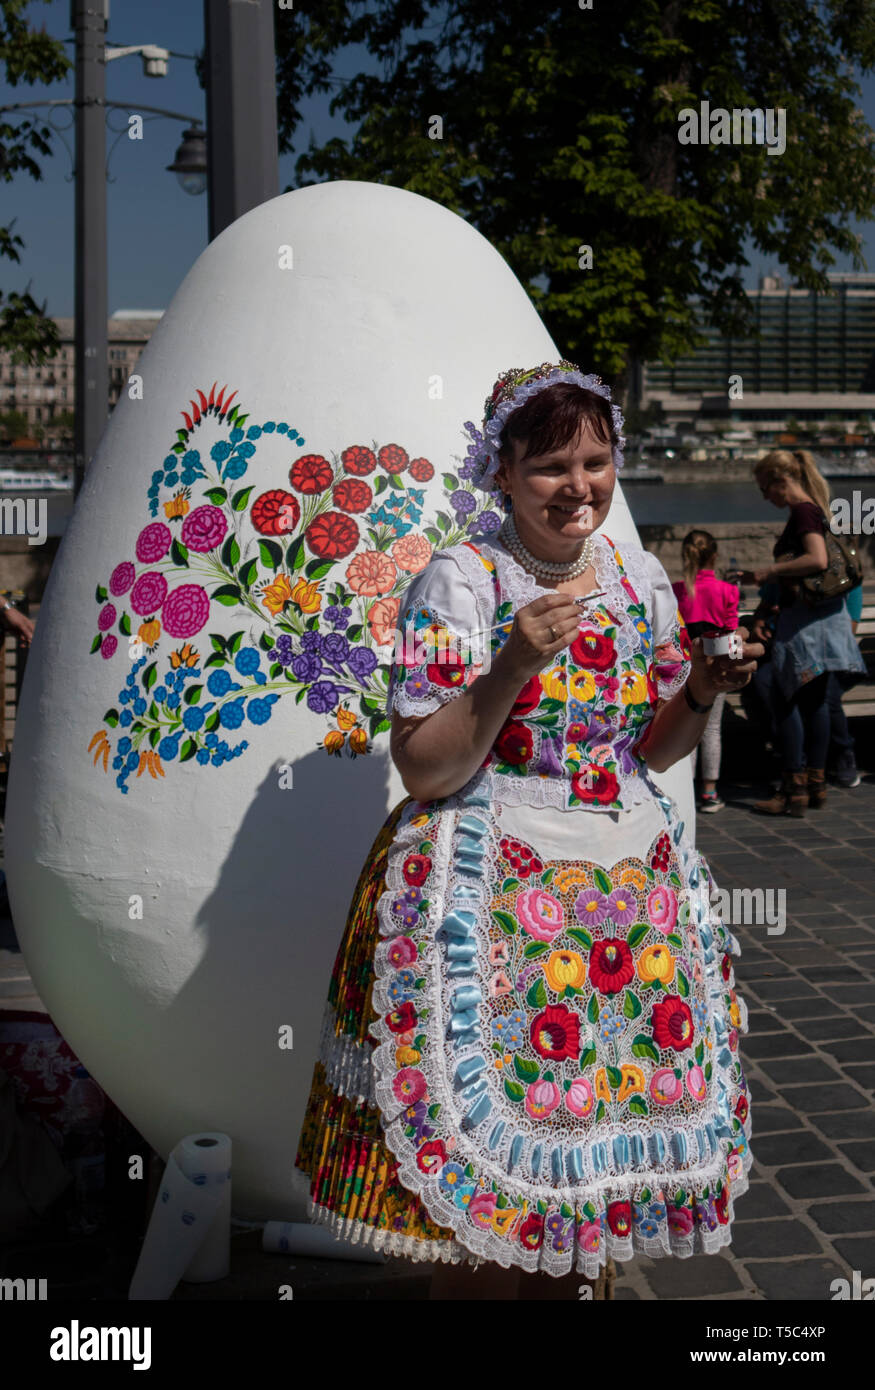 BUDAPEST/HUNGARY - 04.21.2019: A woman wearing traditional embroidered folk costume decorates a giant Easter Egg with floral patterns. Stock Photo